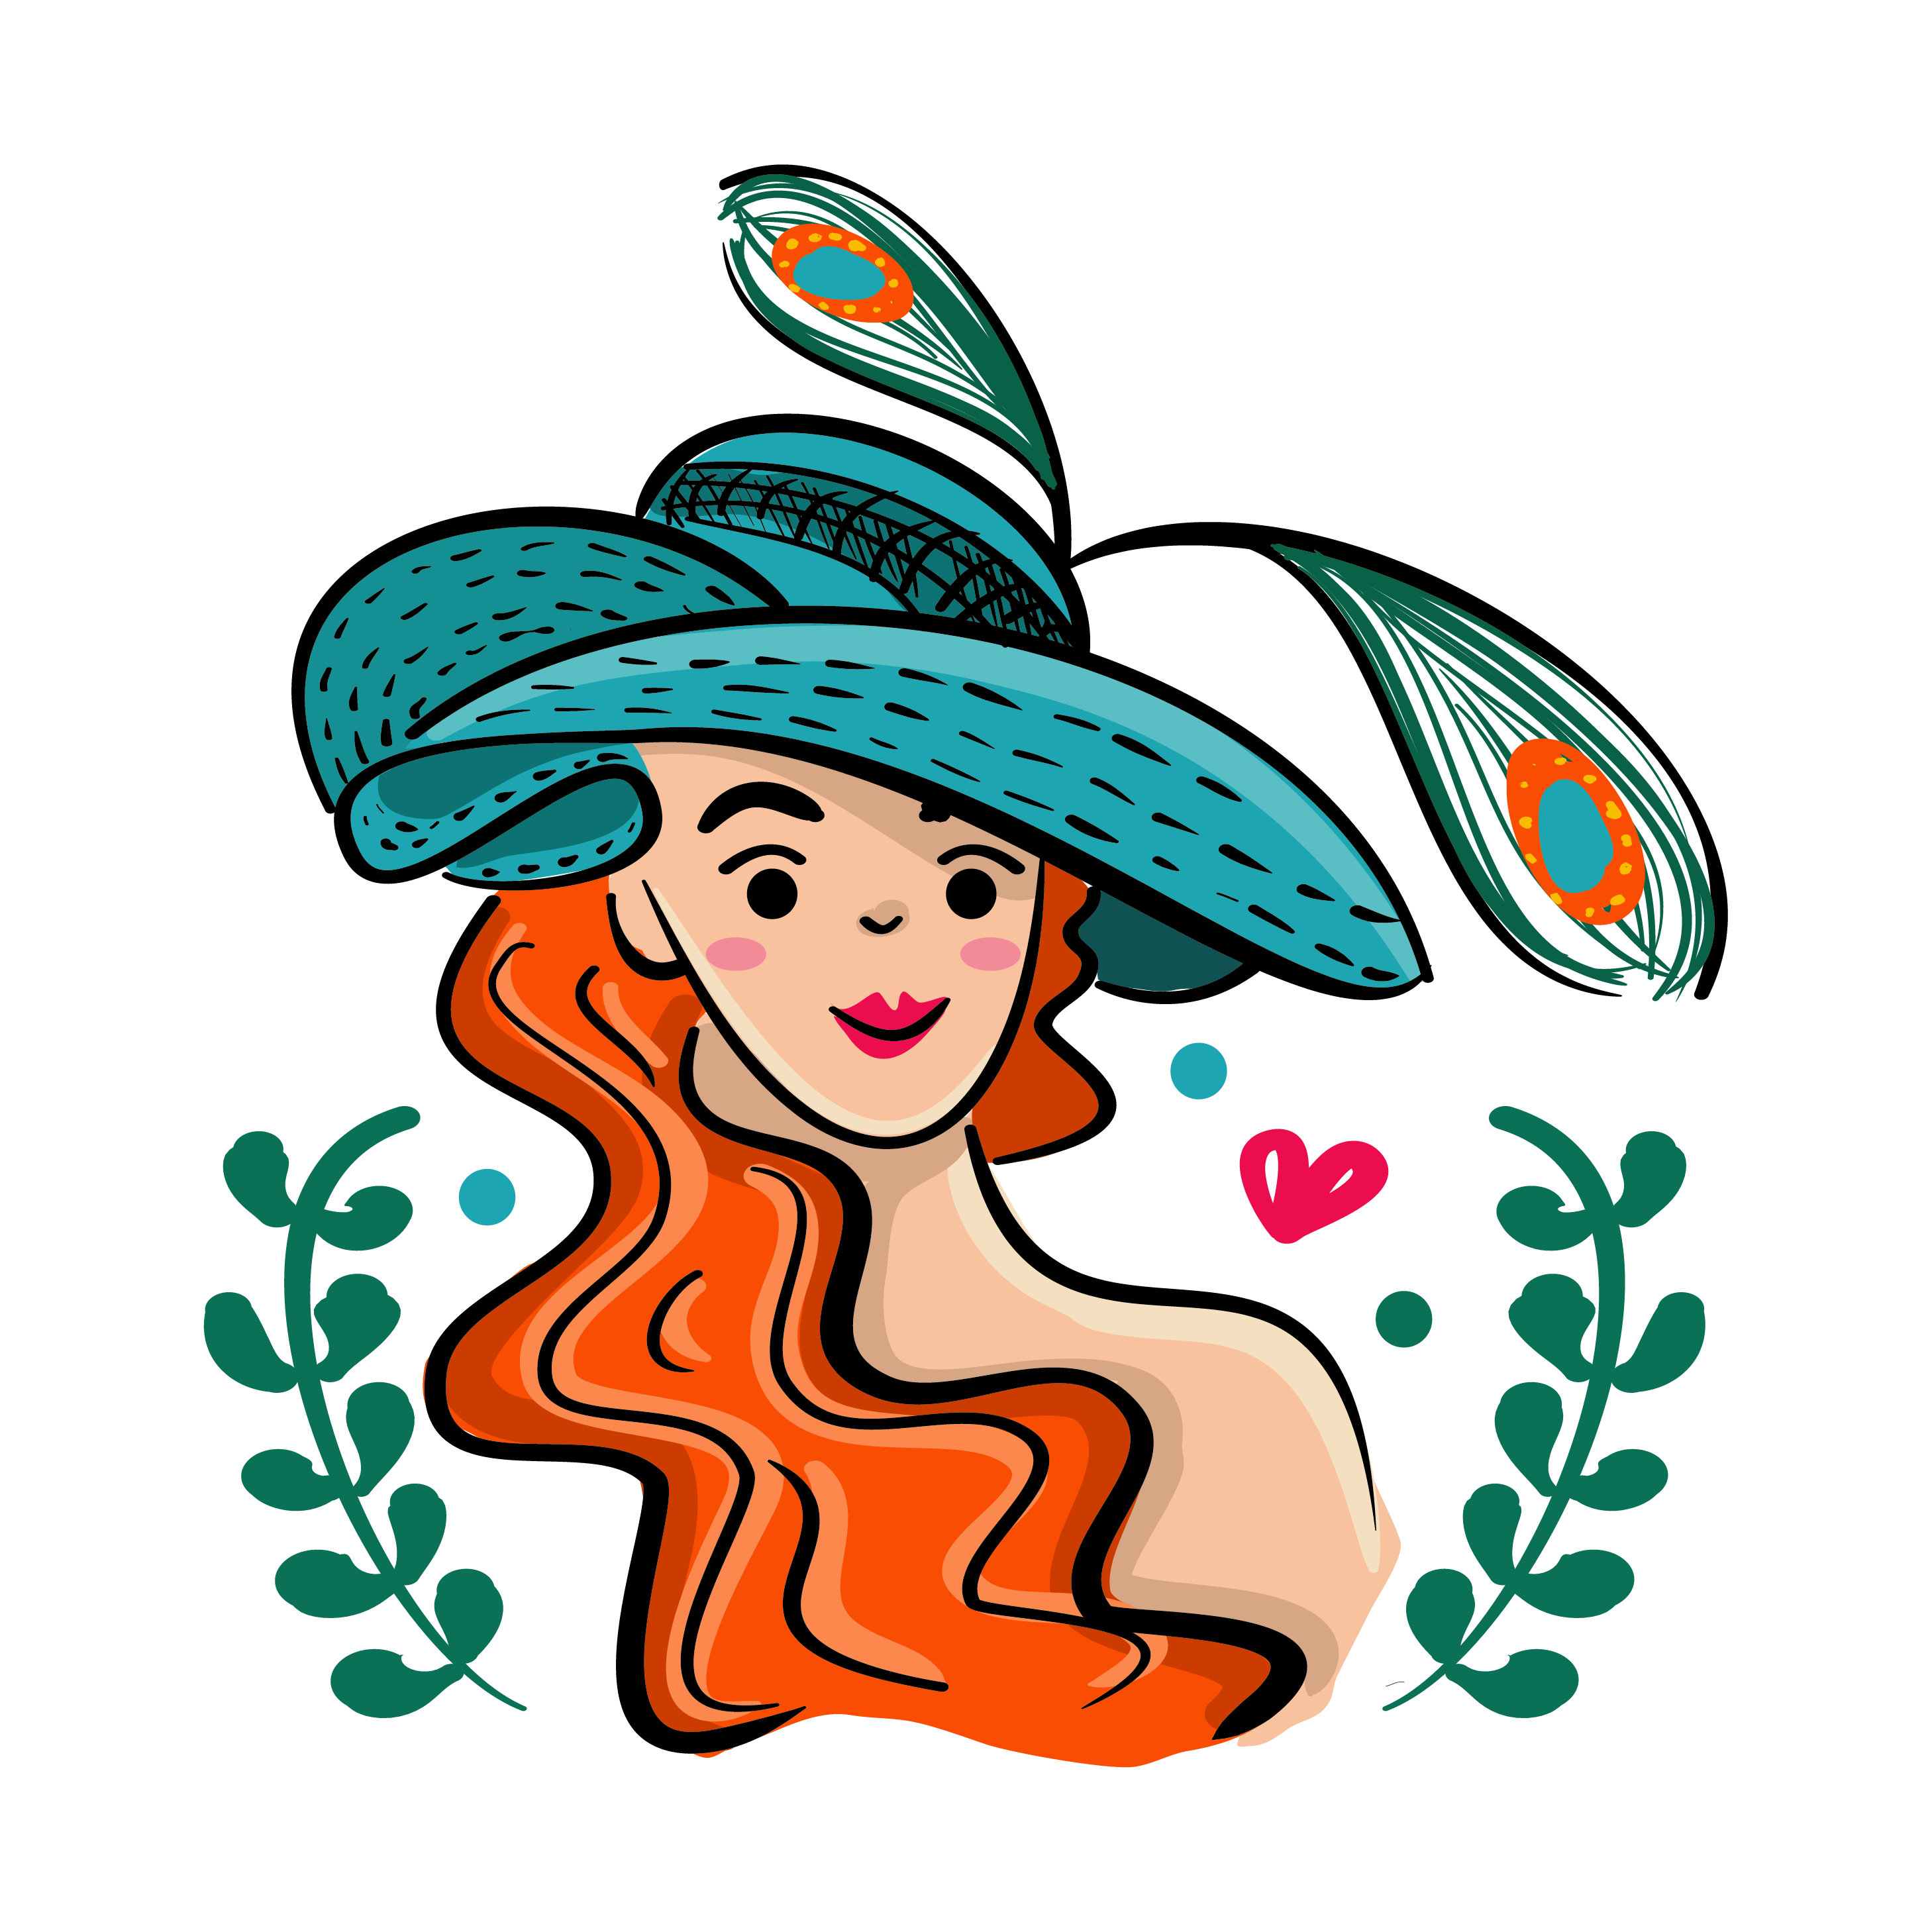 Kentucky Derby Hat with Beautiful Girl Illustration